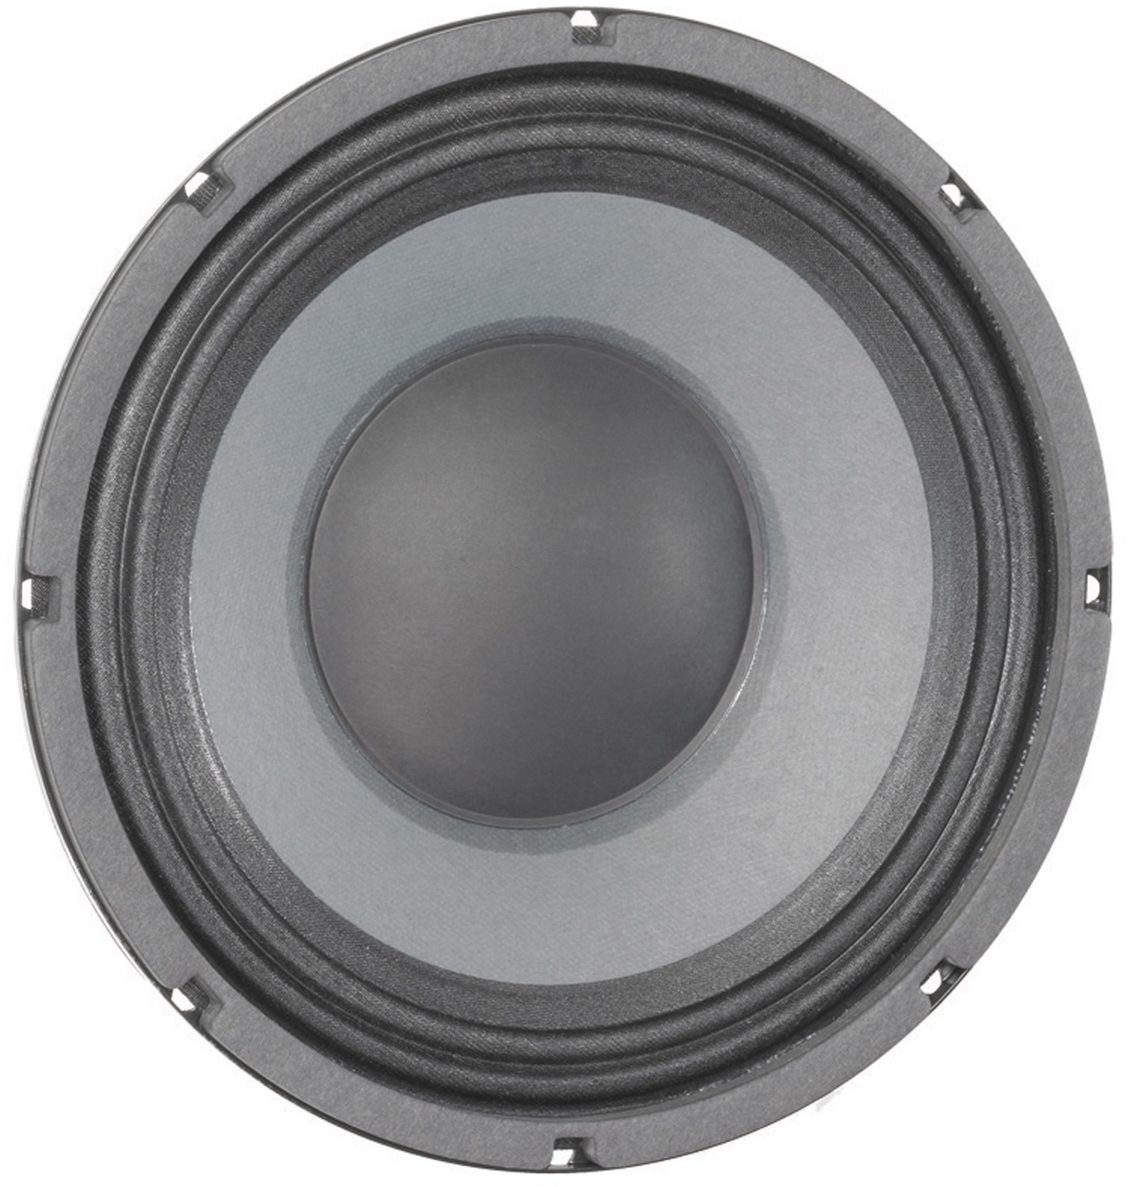 eminence 10 inch guitar speakers